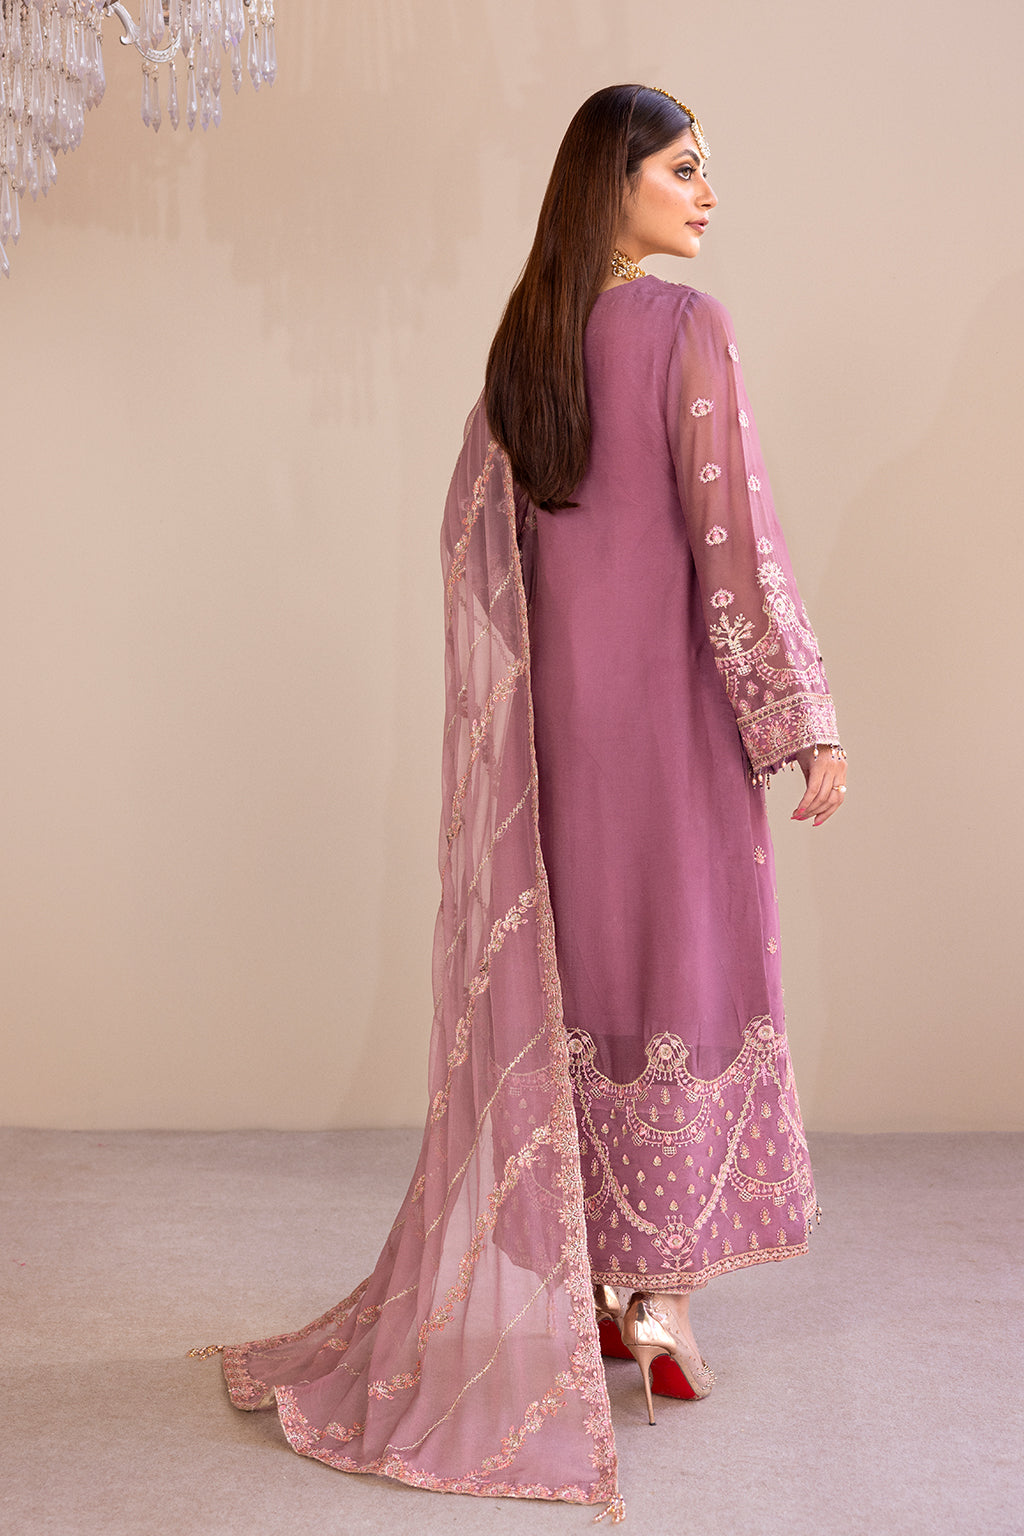 Romansiyyah Luxury Formals Collection '23 By Emaan Adeel Estelle